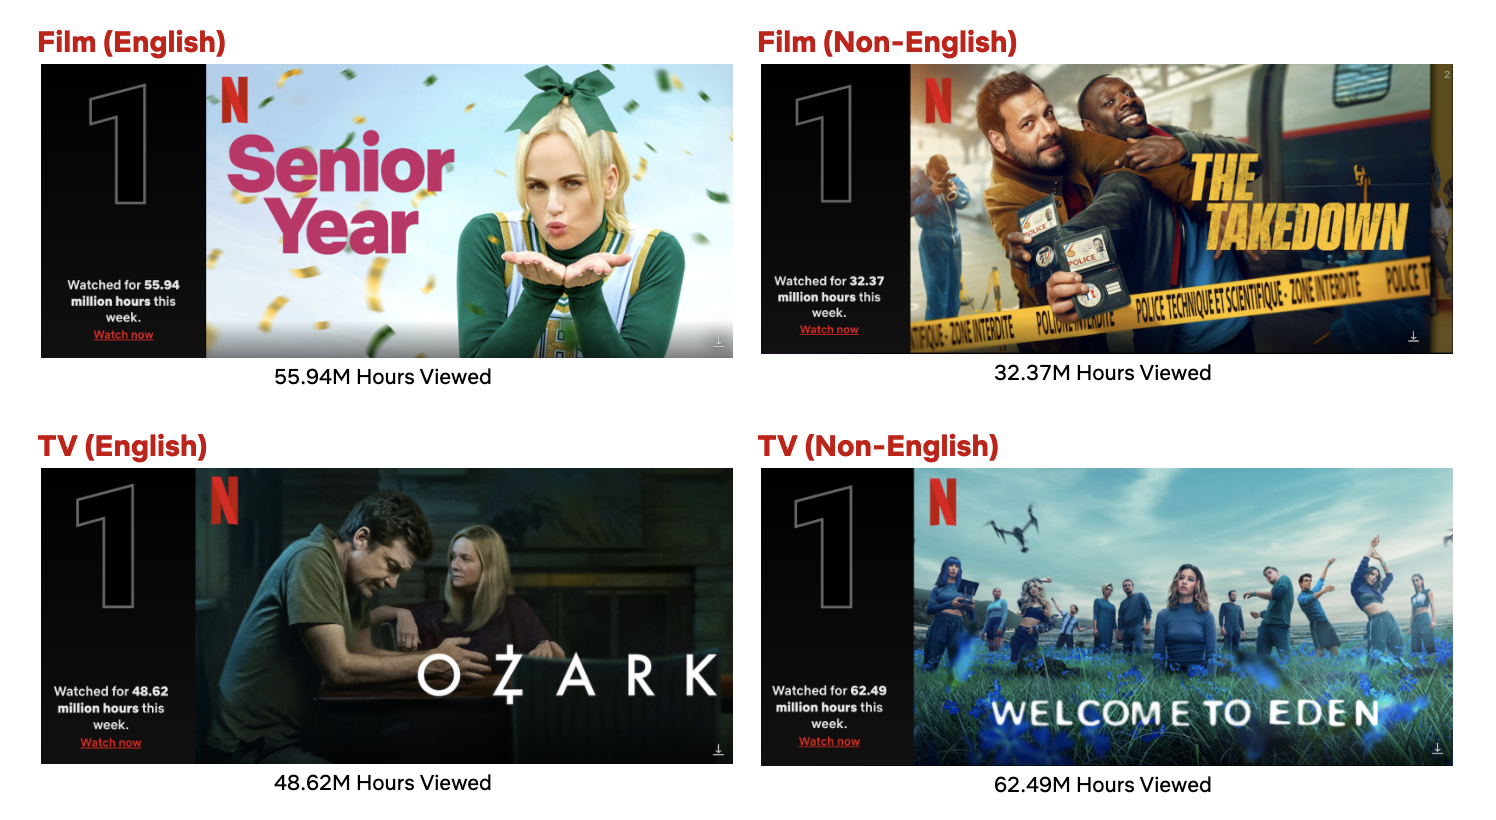 Top 10 Week of May 9: ‘Senior Year’ Tops the Films List,  ‘Welcome to Eden’ Grabs the Most Views This Week